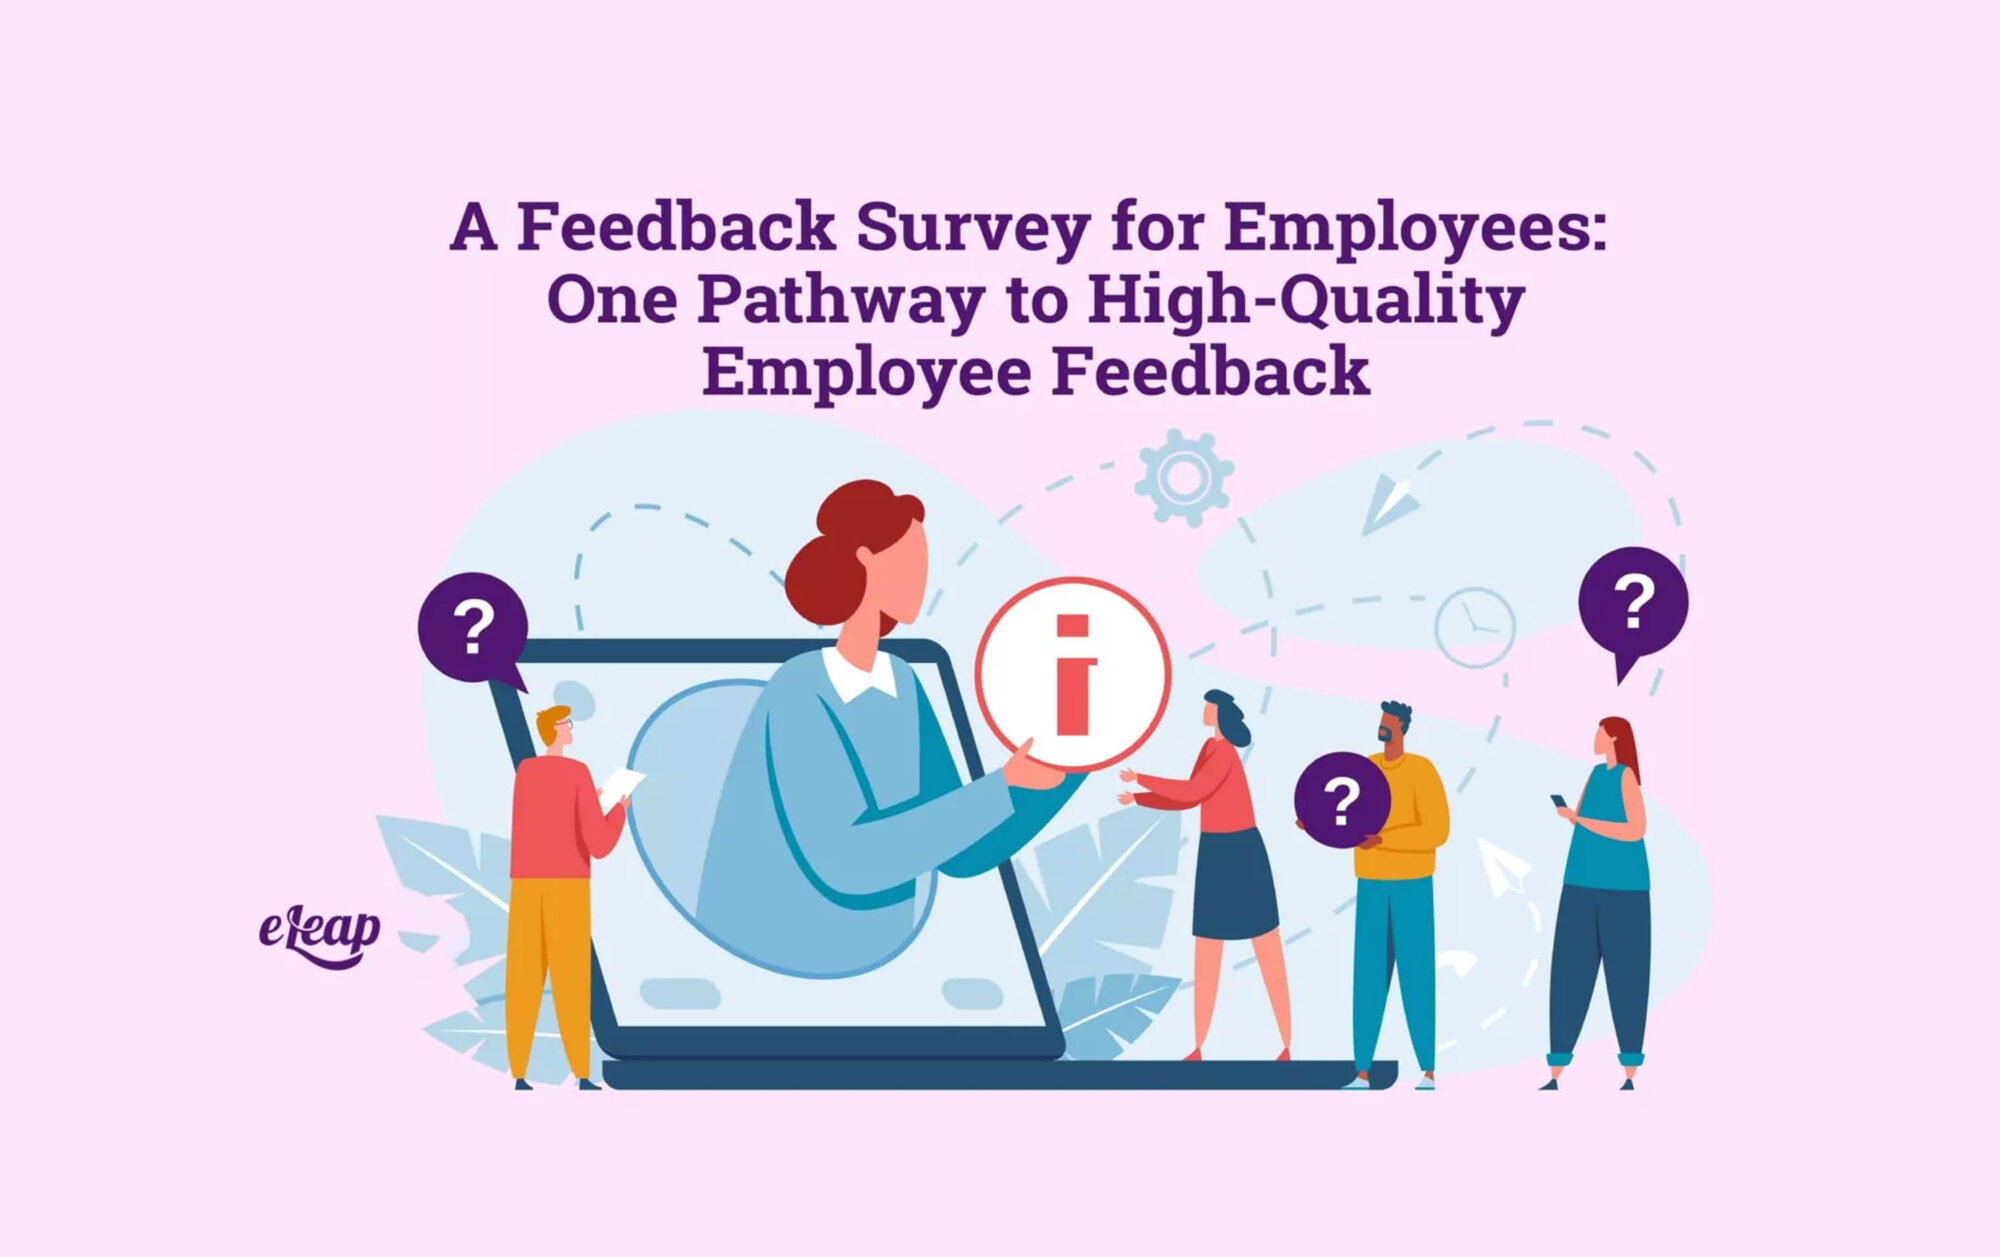 A Feedback Survey for Employees: One Pathway to High-Quality Employee Feedback